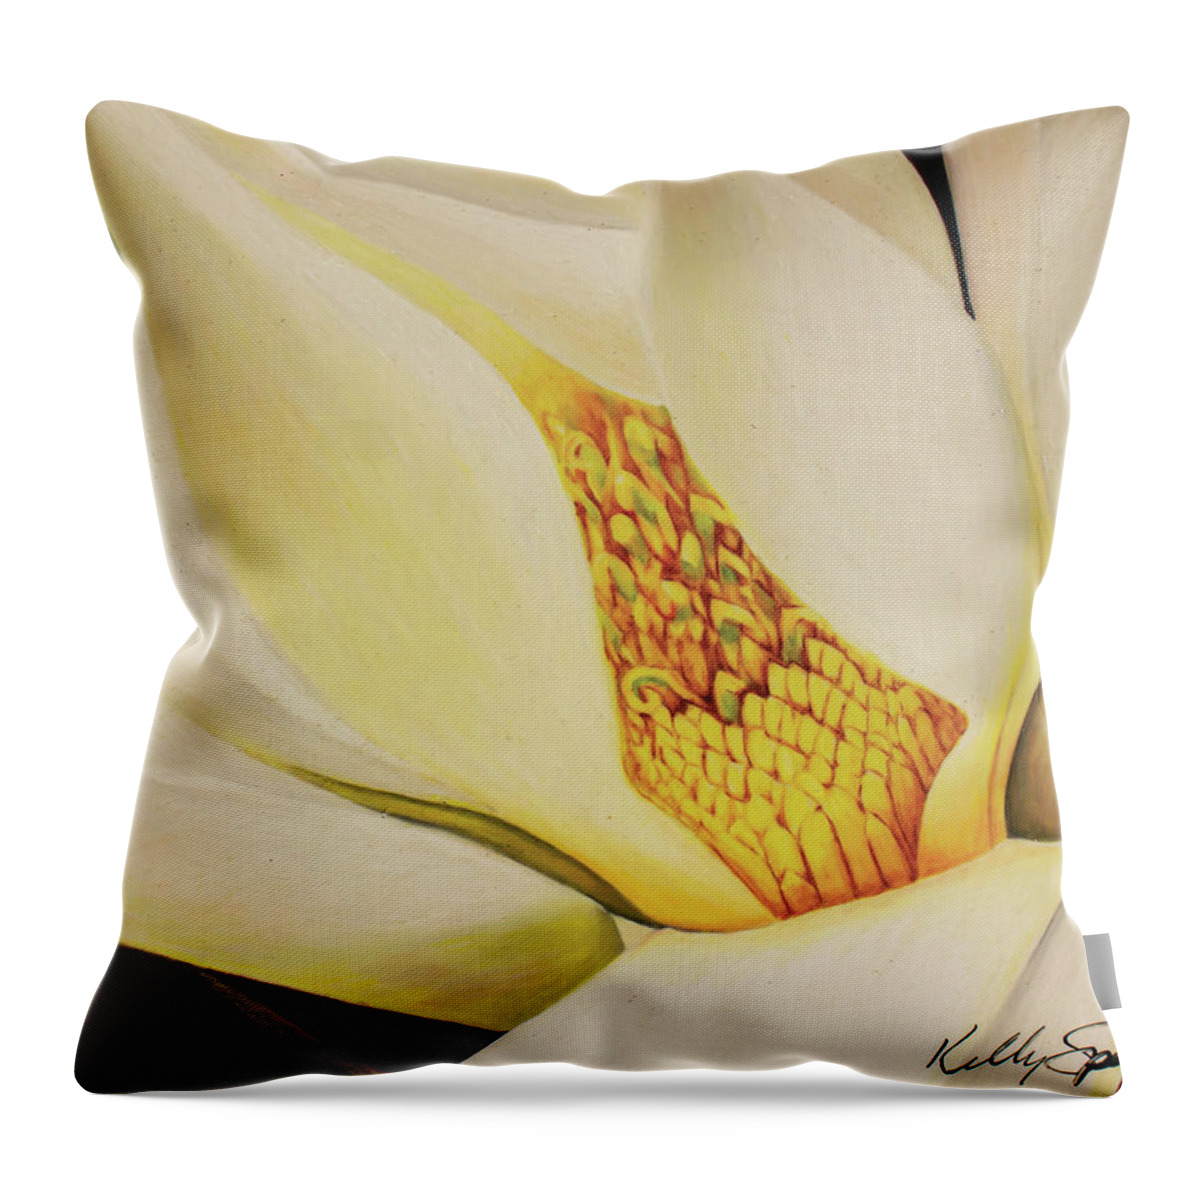 Magnolia Throw Pillow featuring the drawing The Last Magnolia by Kelly Speros